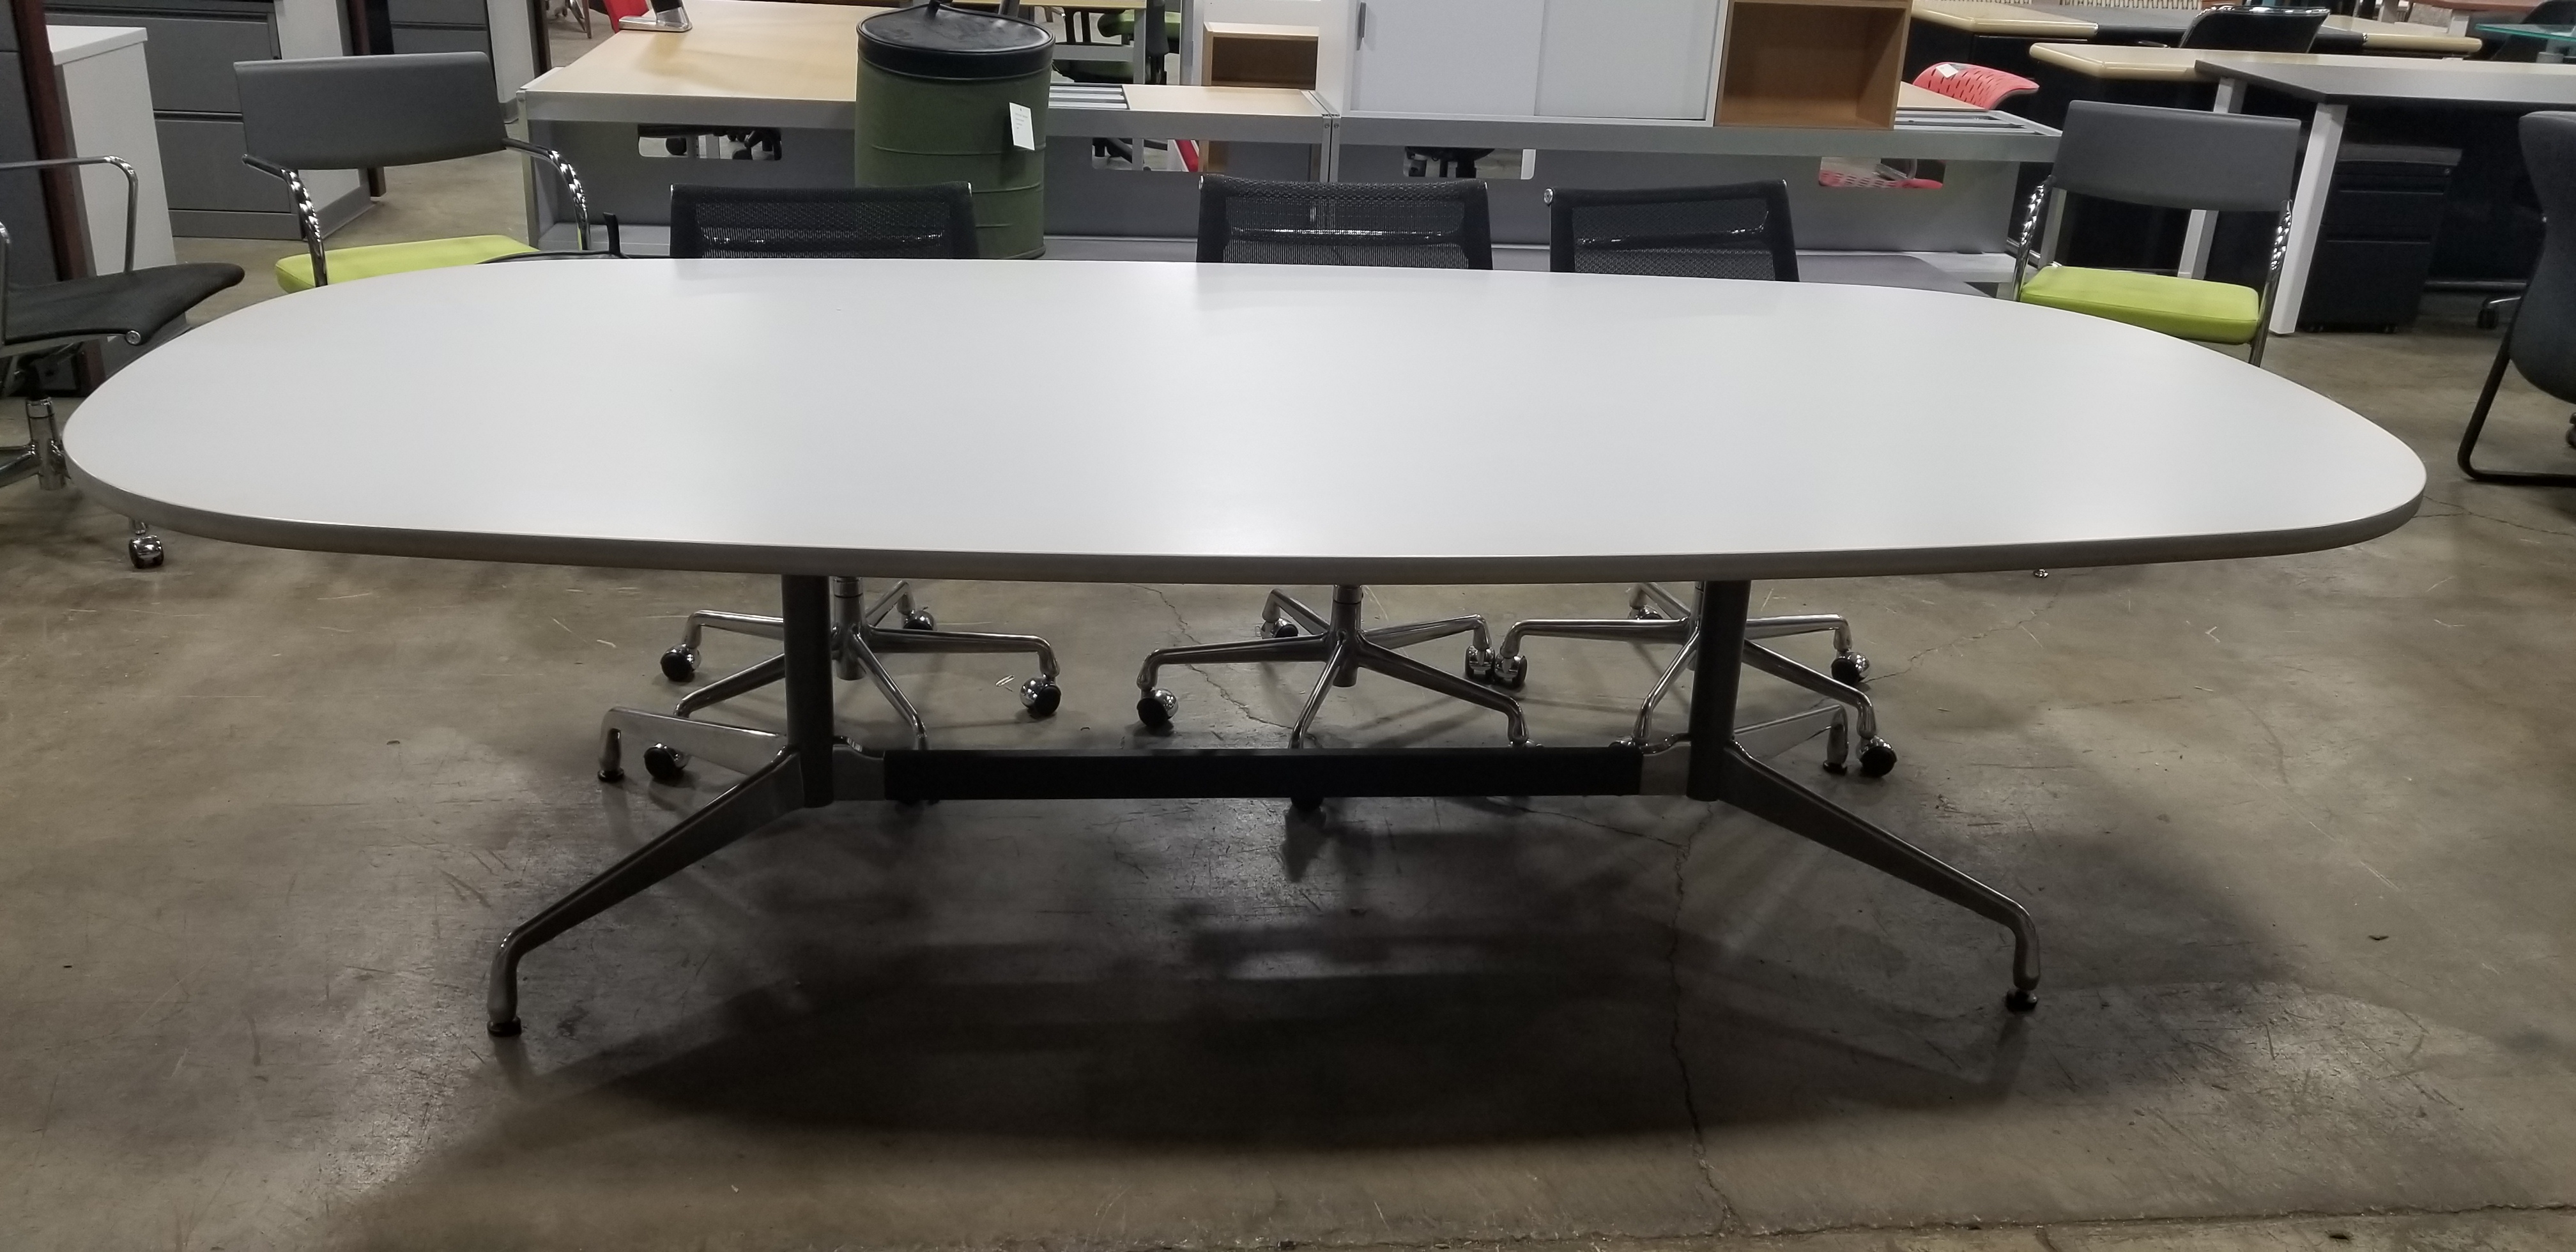 Eames Table - Chicago - New - Used - Refurbished